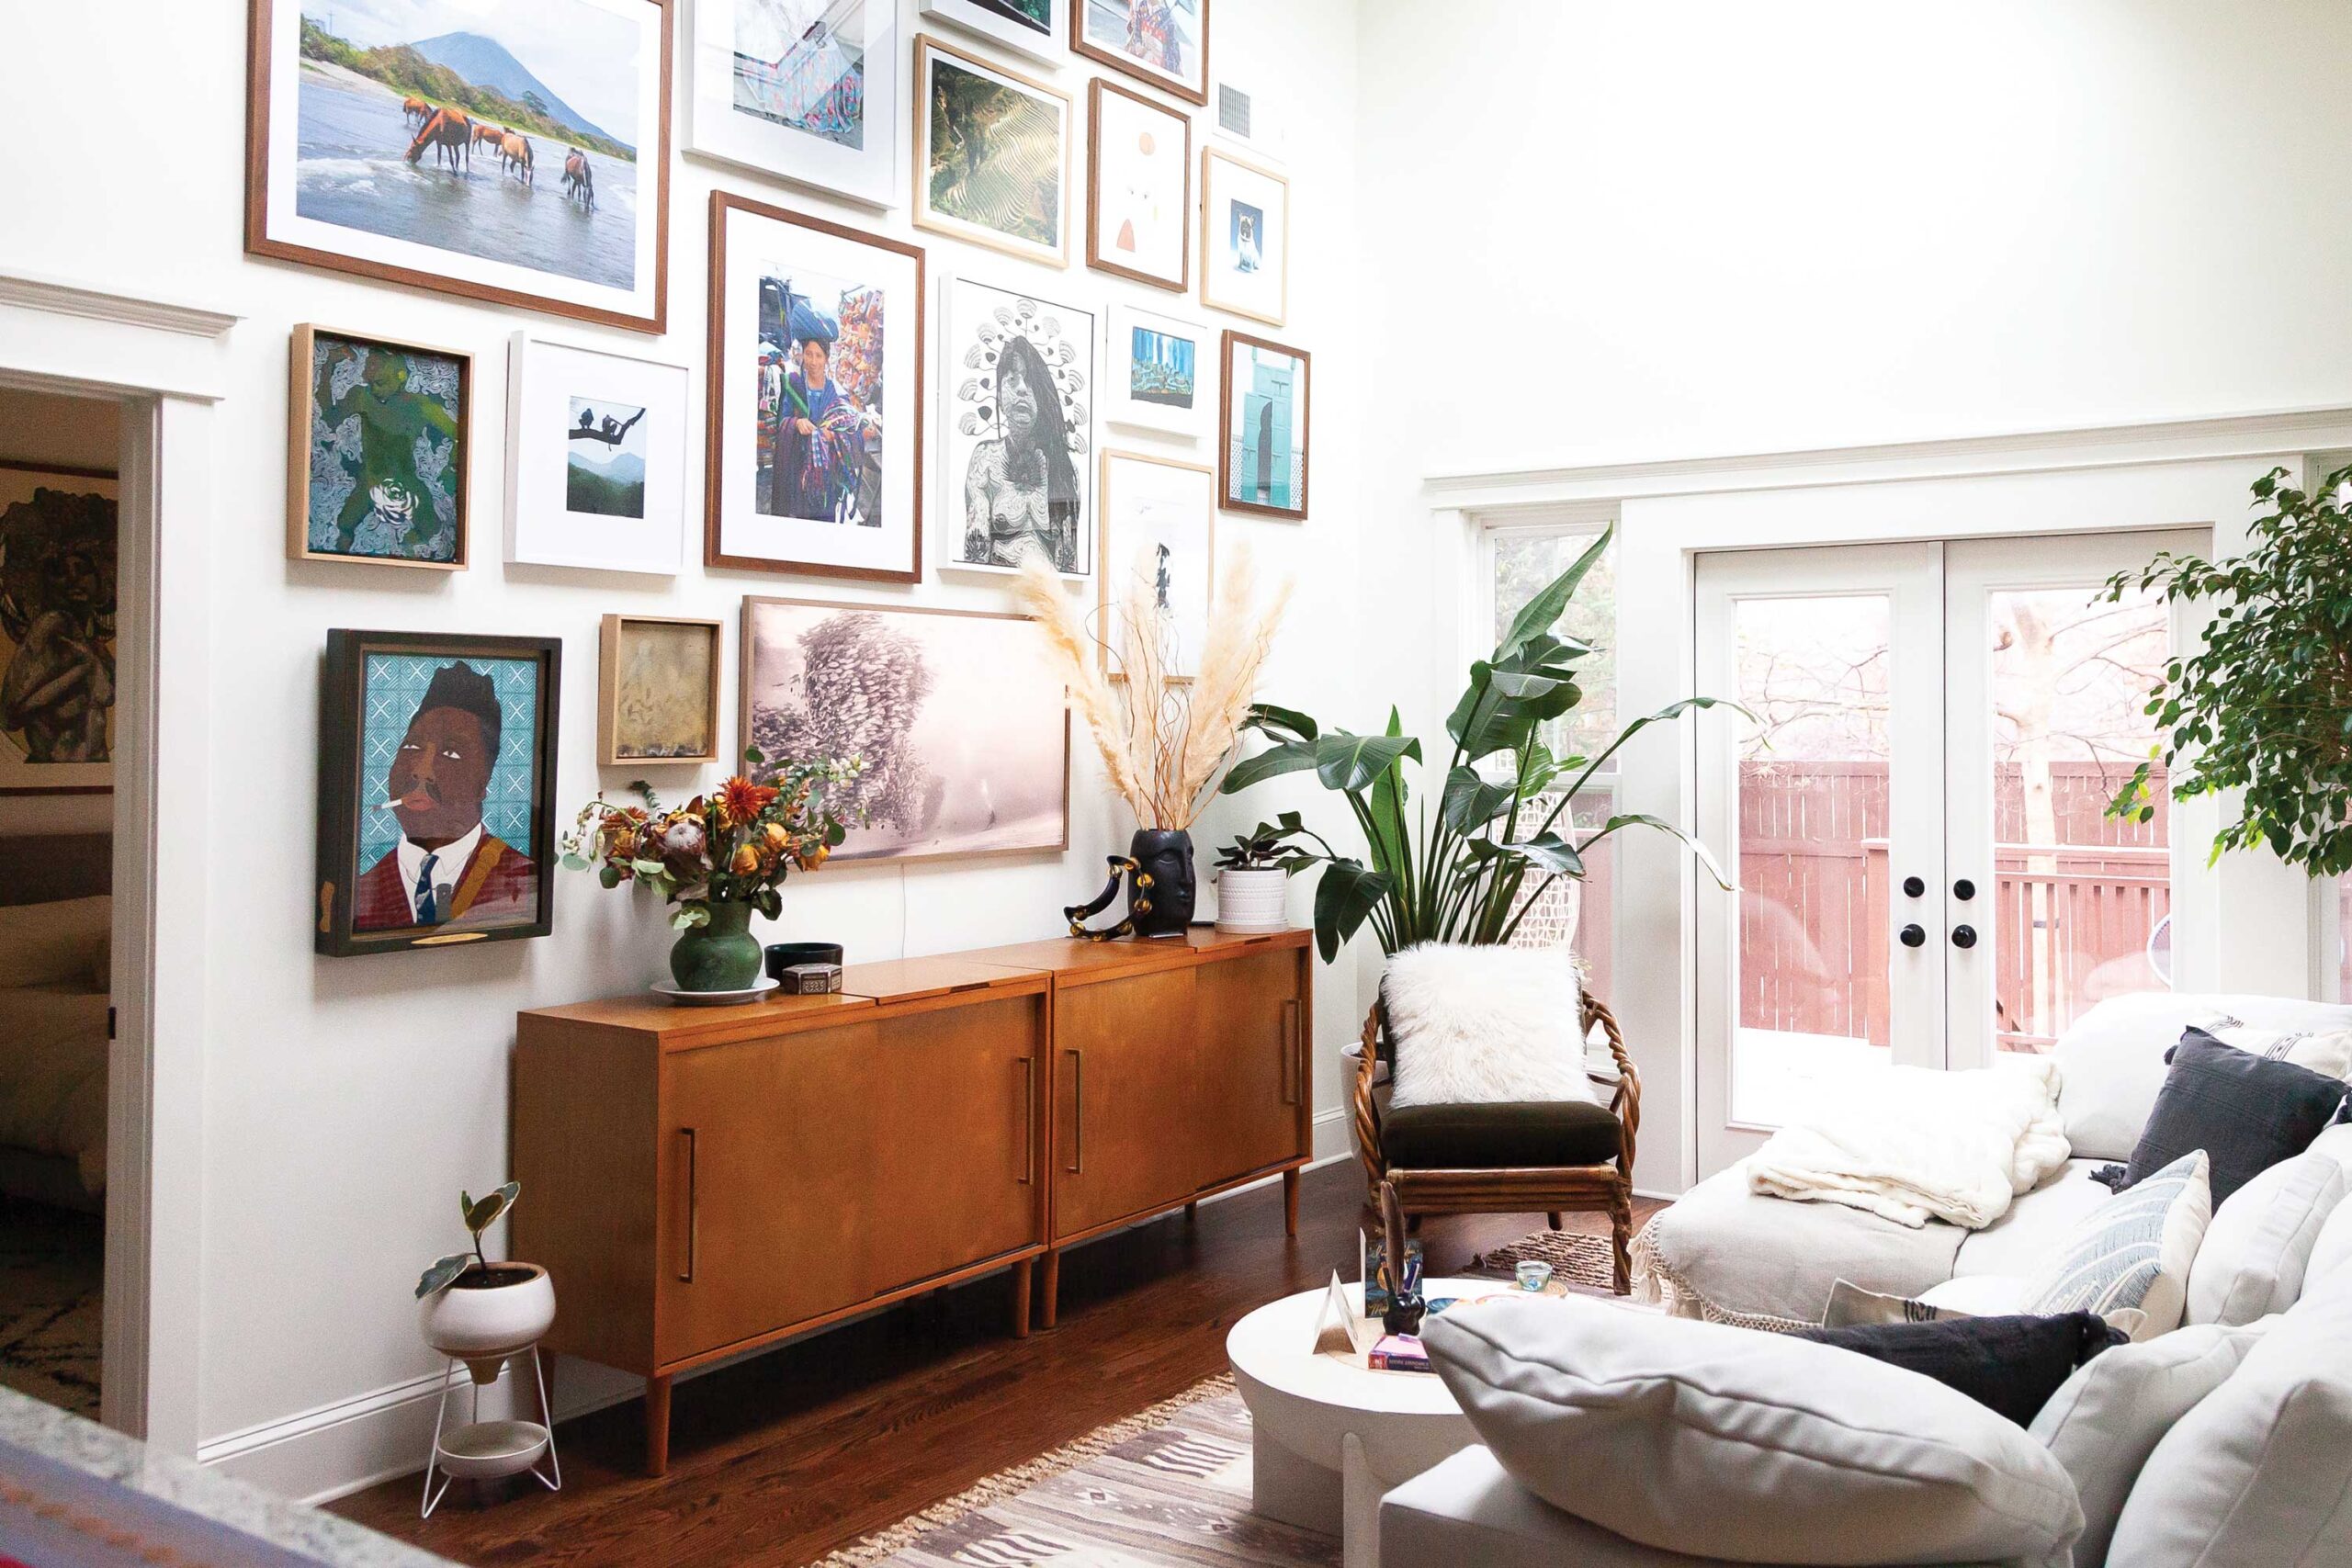 Emily Joffrion’s wall is an eclectic mix of art she has created and pieces she has collected. It’s a modern story that describes who she is. Photo: @loandbehold.atl